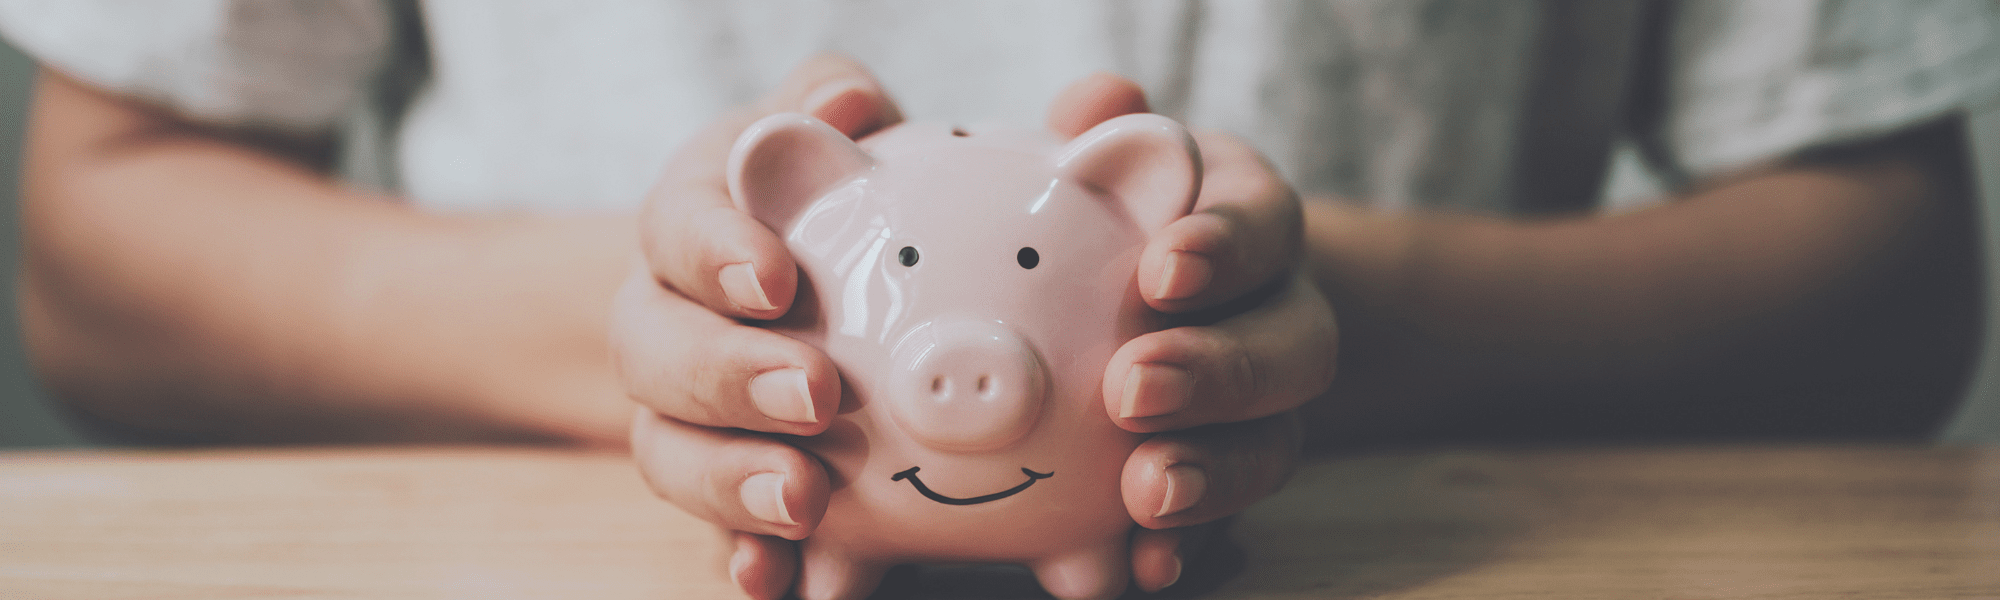 Woman's hands holding a piggy bank resting on table